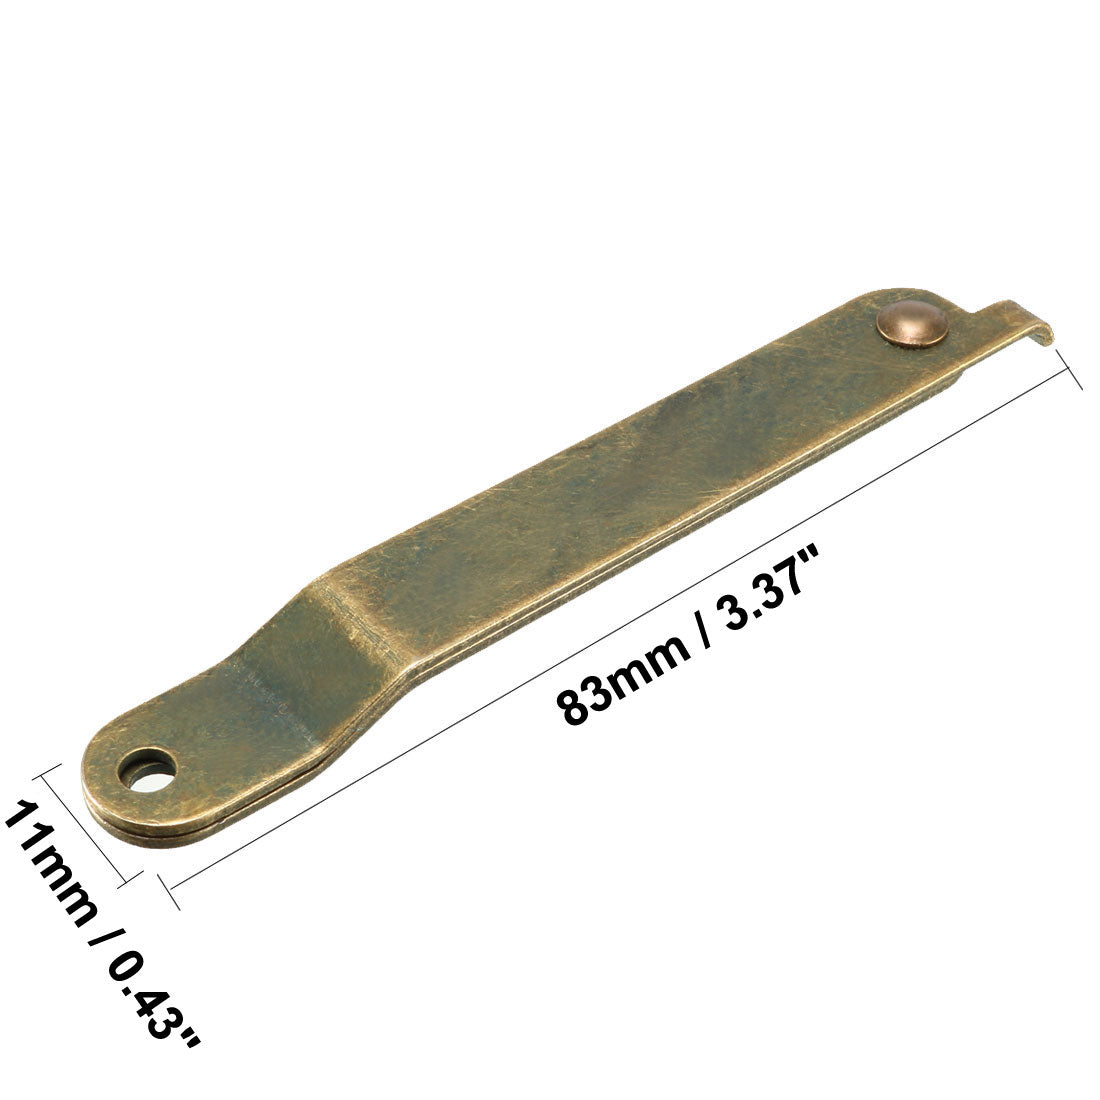 uxcell Uxcell Folding Support Hinge Furniture Decorative Box Lid Hinges Bronze 83mmx11mm 10 Pcs